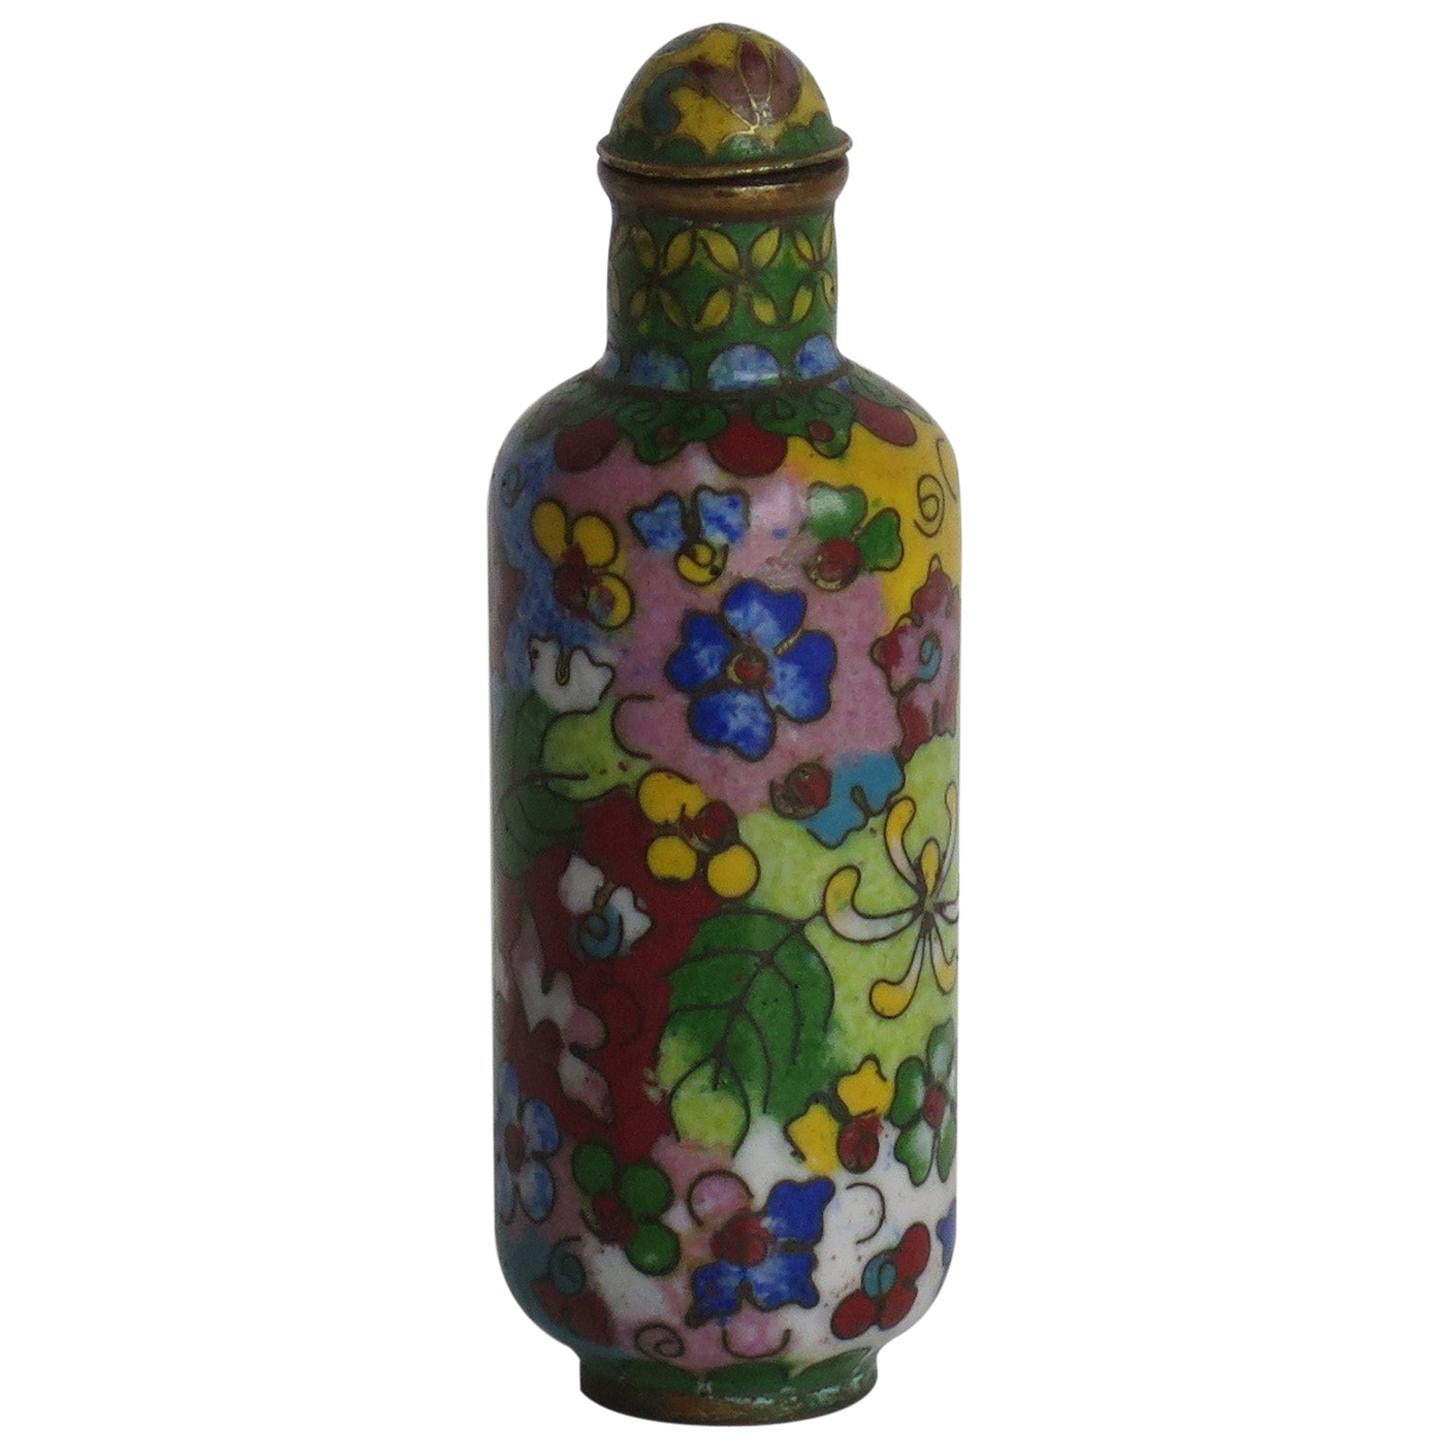 Chinese Snuff Bottle Hand Enameled Cloisonne 100 Flowers Decoration, 19thC Qing